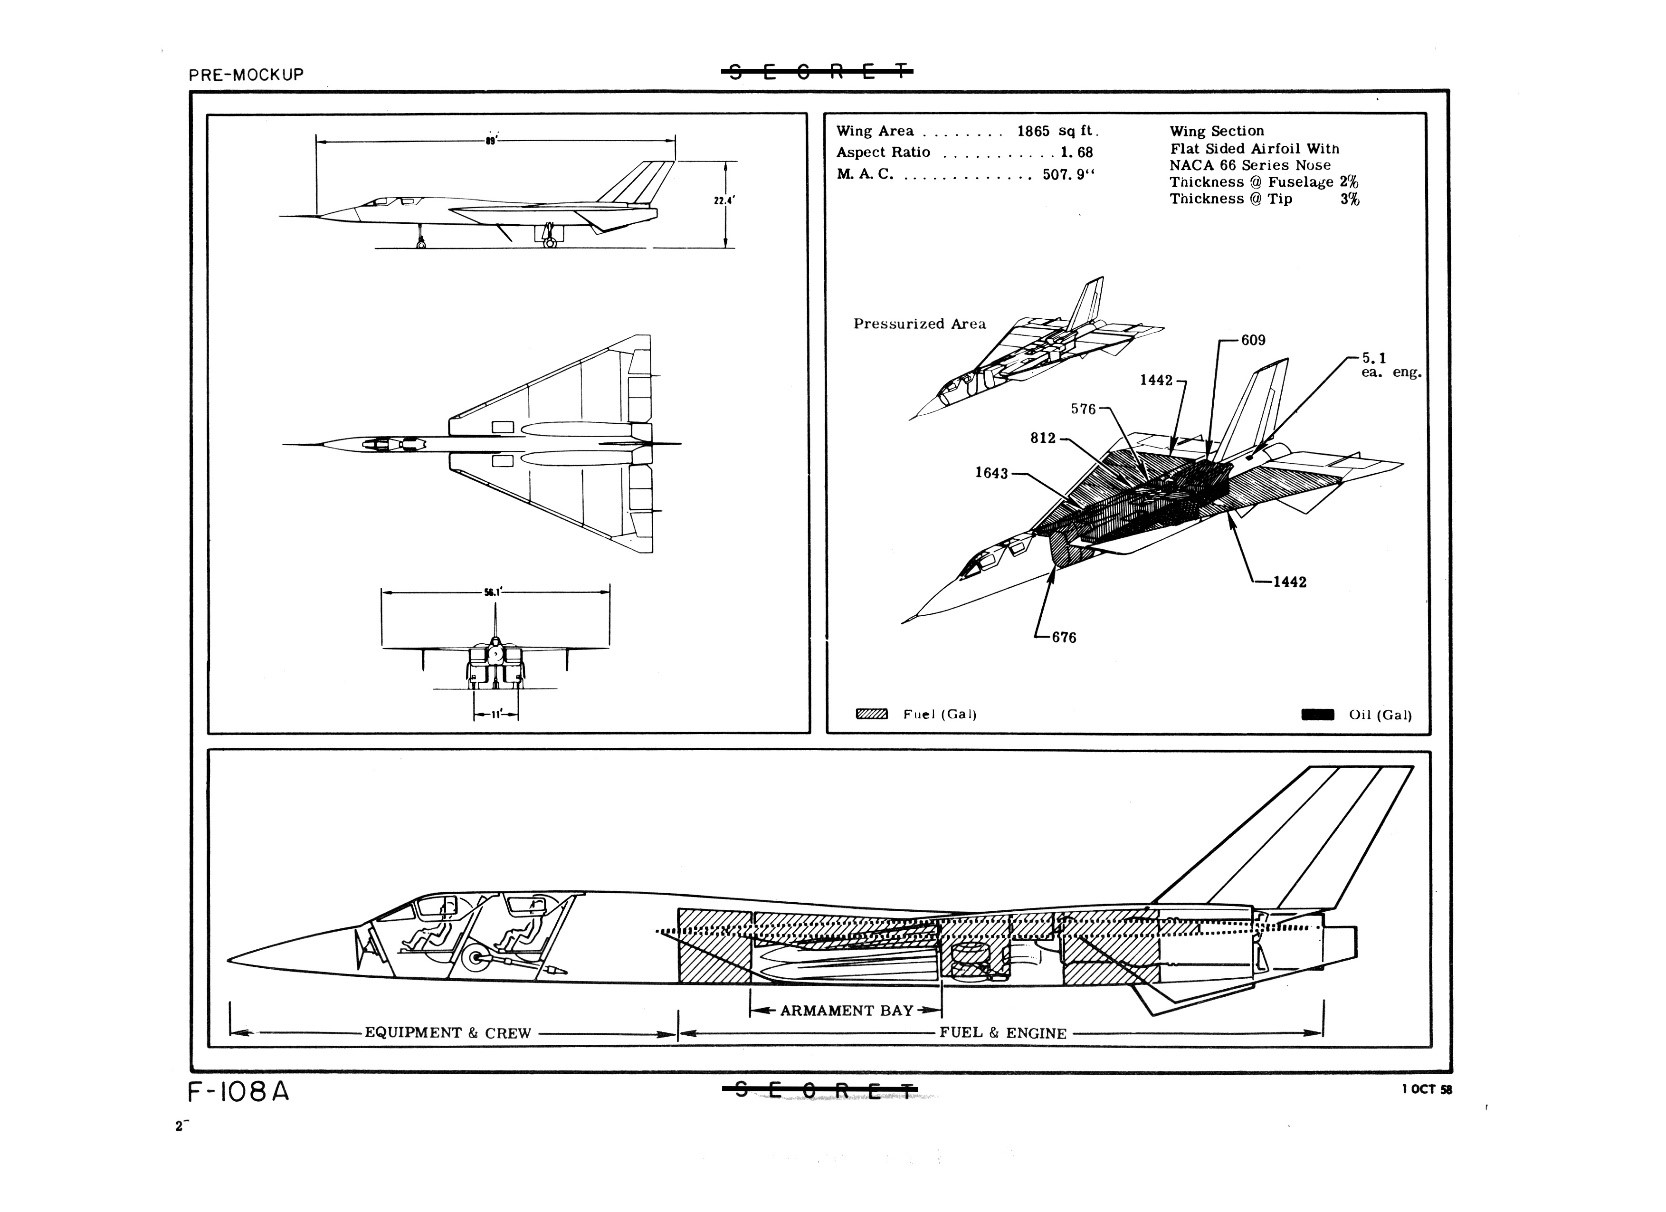 Illustration showing the F-108 layout